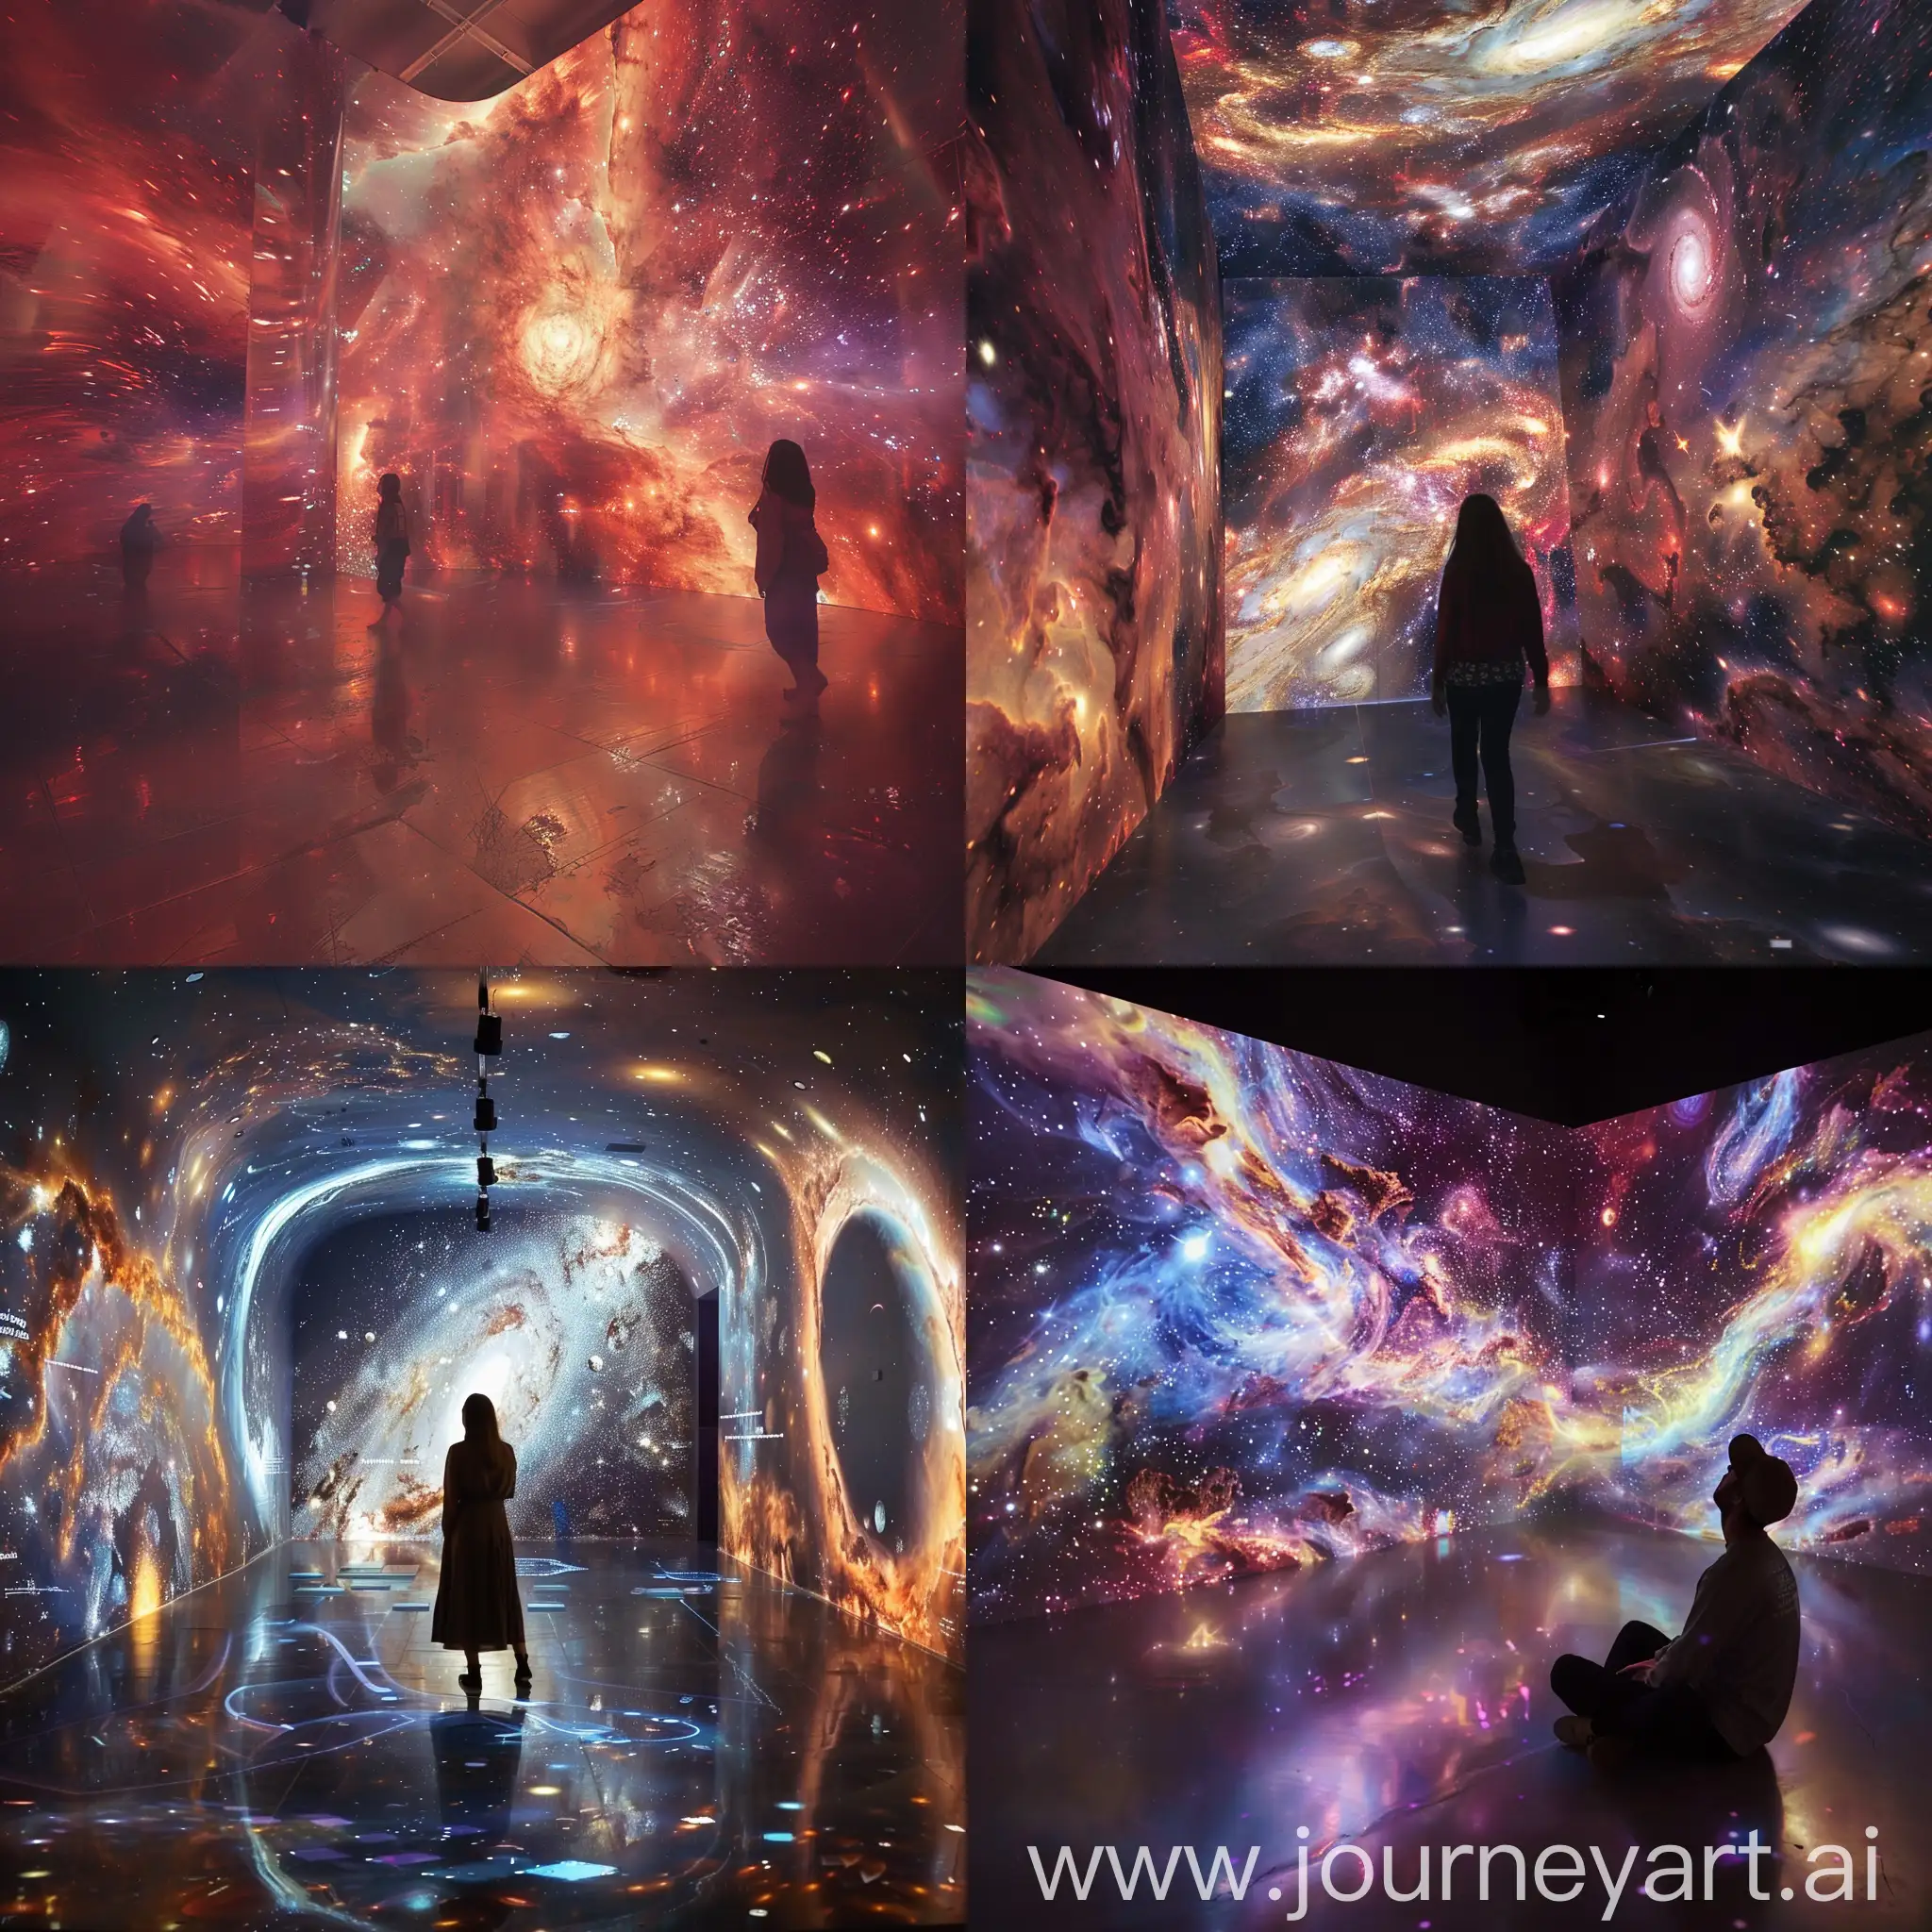 Immersive-Space-Exhibition-Floating-in-the-Universe